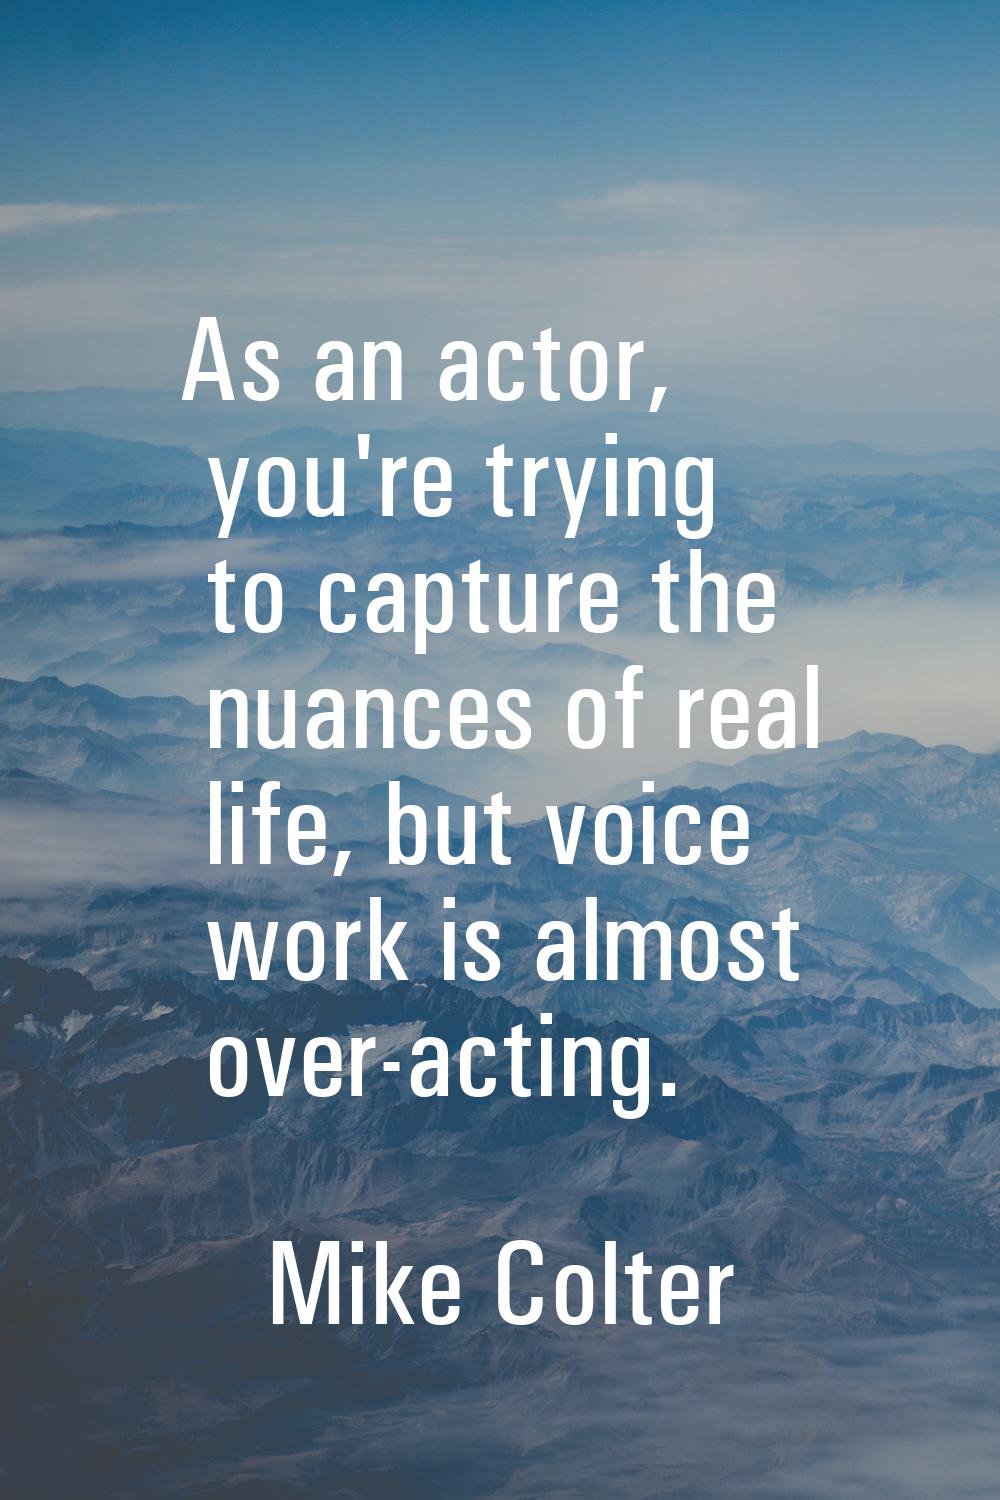 As an actor, you're trying to capture the nuances of real life, but voice work is almost over-actin